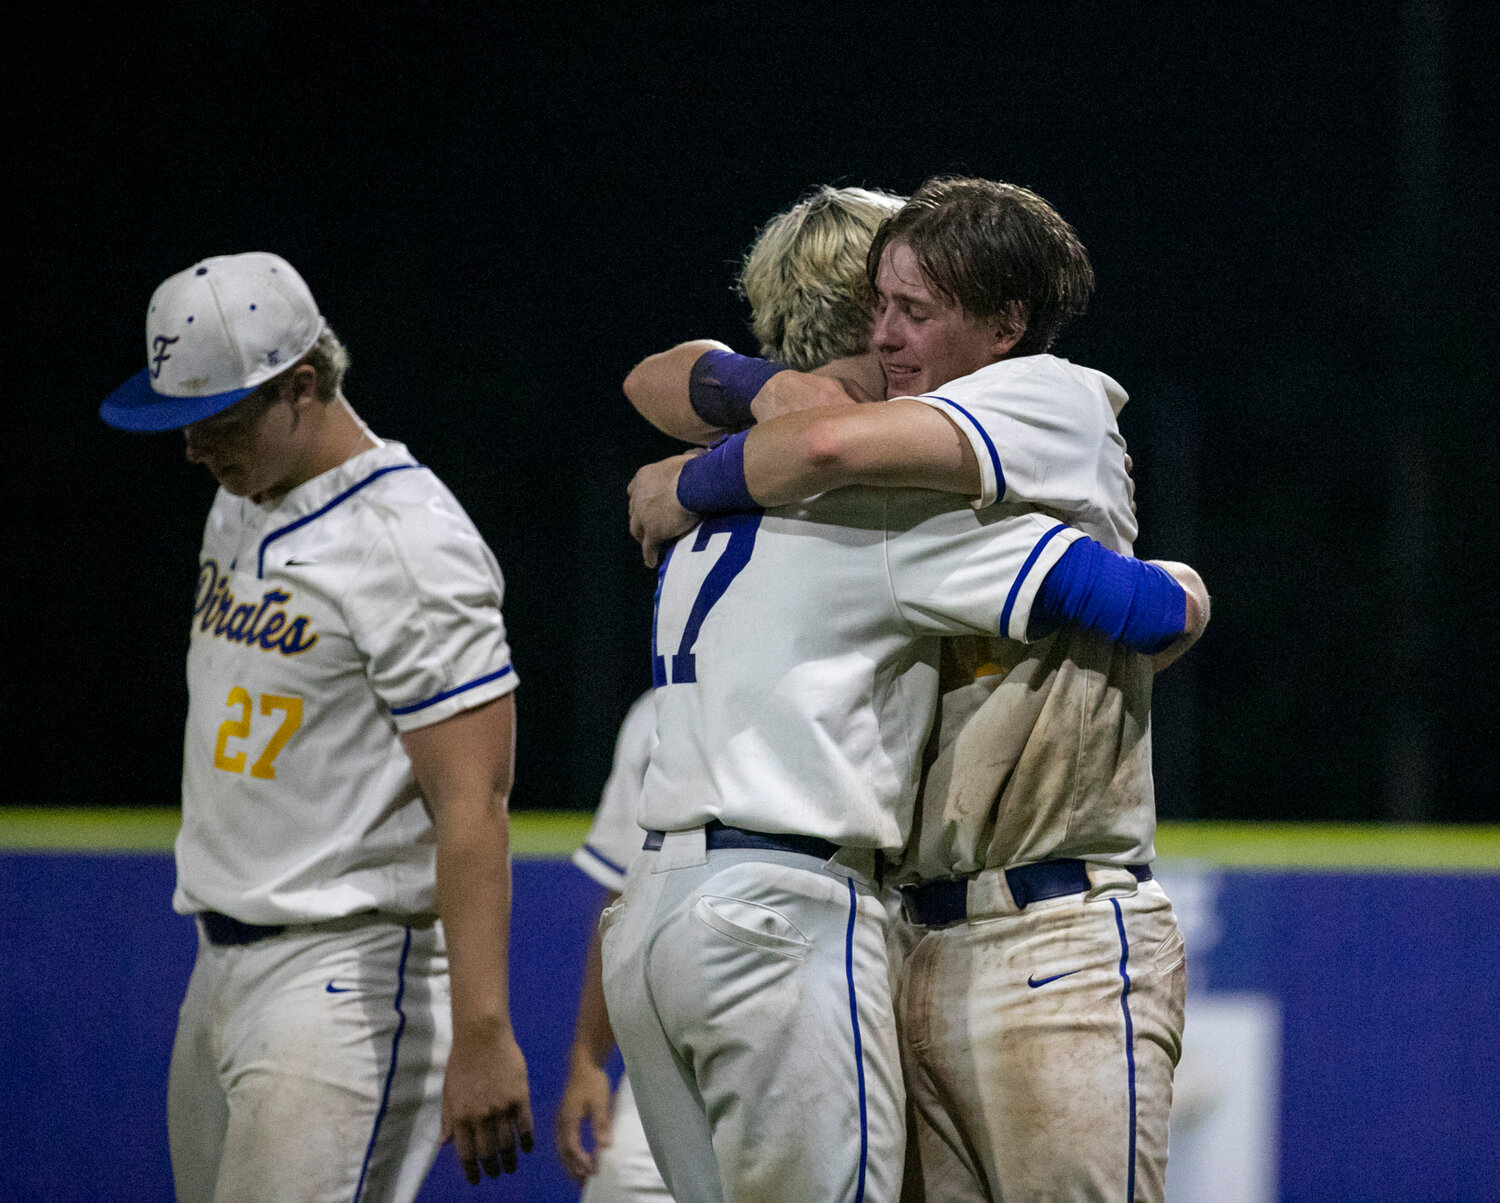 Hollon Brock bearhugs Julian Callahan after the Fairhope Pirates were swept by the Smiths Station Panthers in the first round of the Class 7A state playoffs Friday, April 28, at Volanta Park in Fairhope.